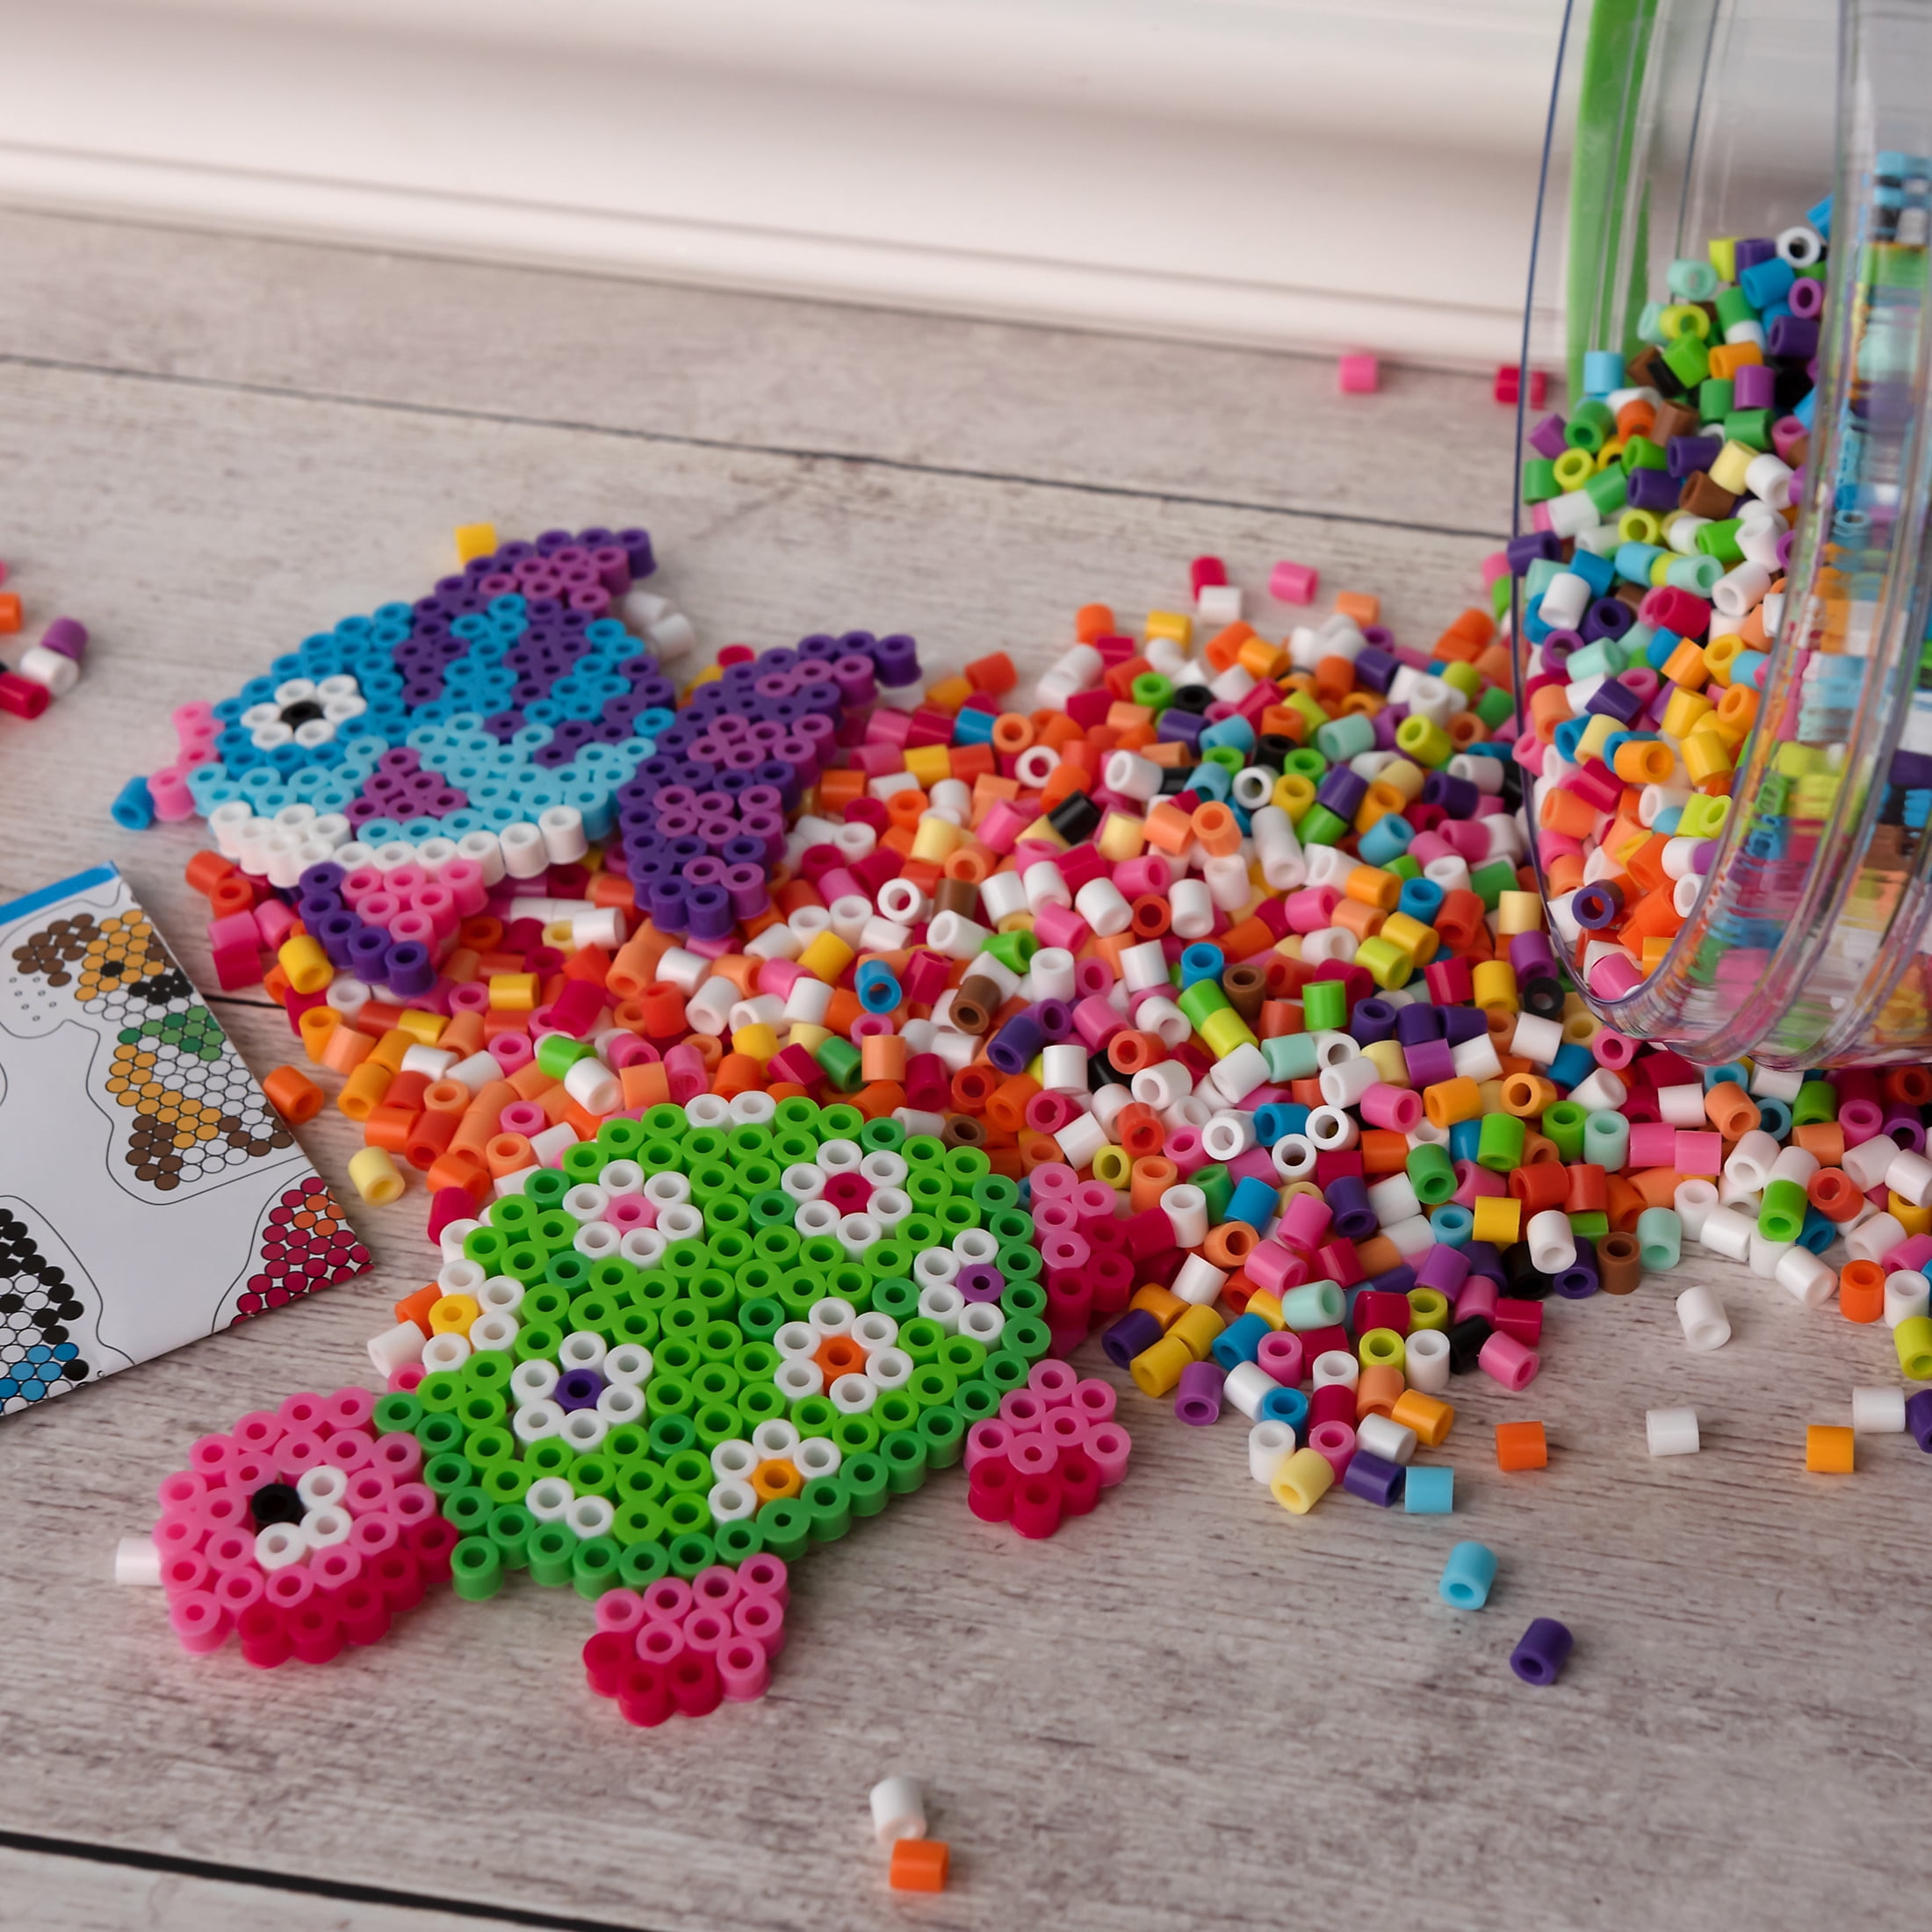 Kids Club Let's Make Silly Jellies with Perler!, Classes